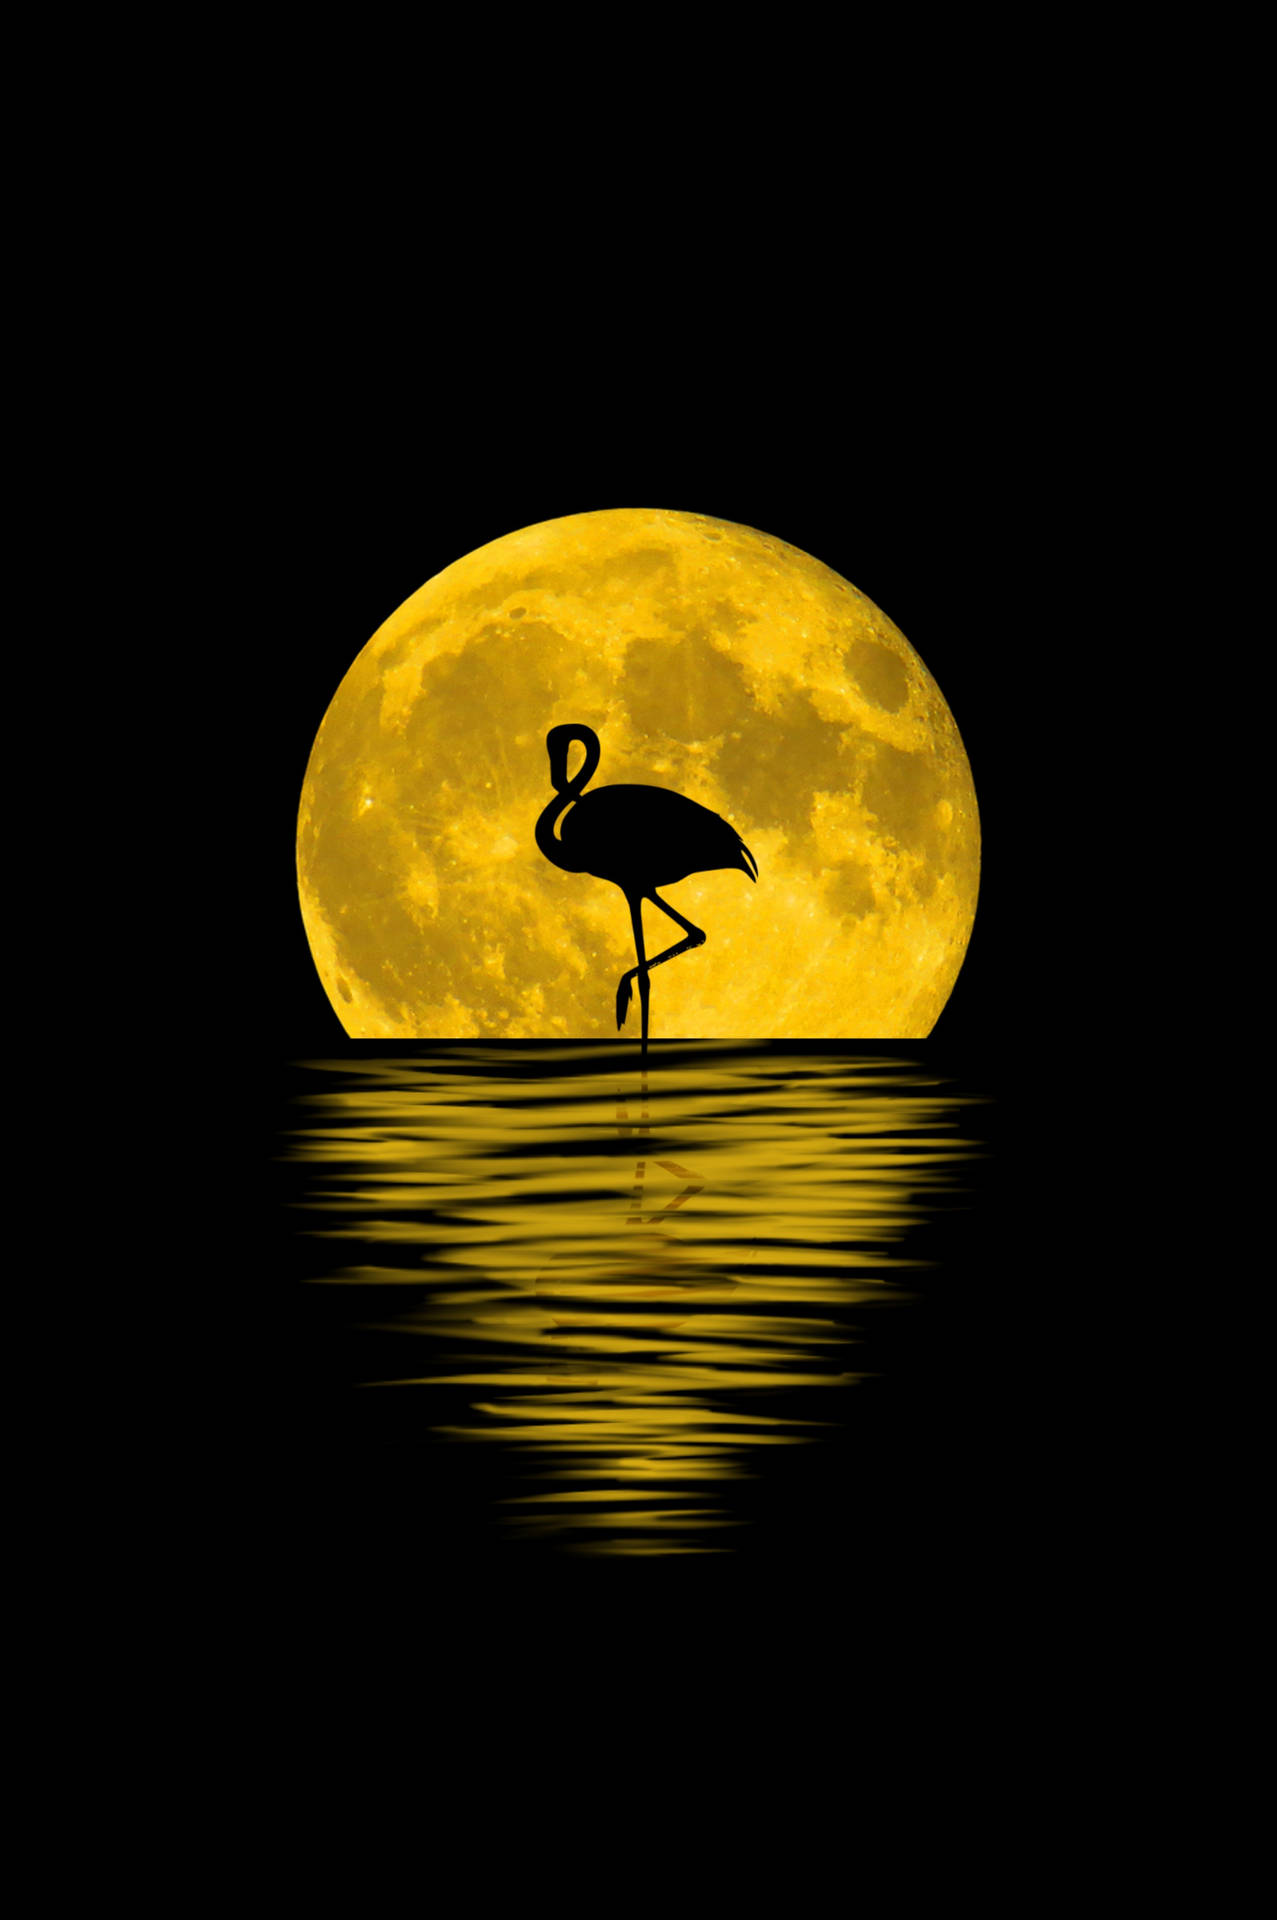 Flamingo 3004X4516 Wallpaper and Background Image